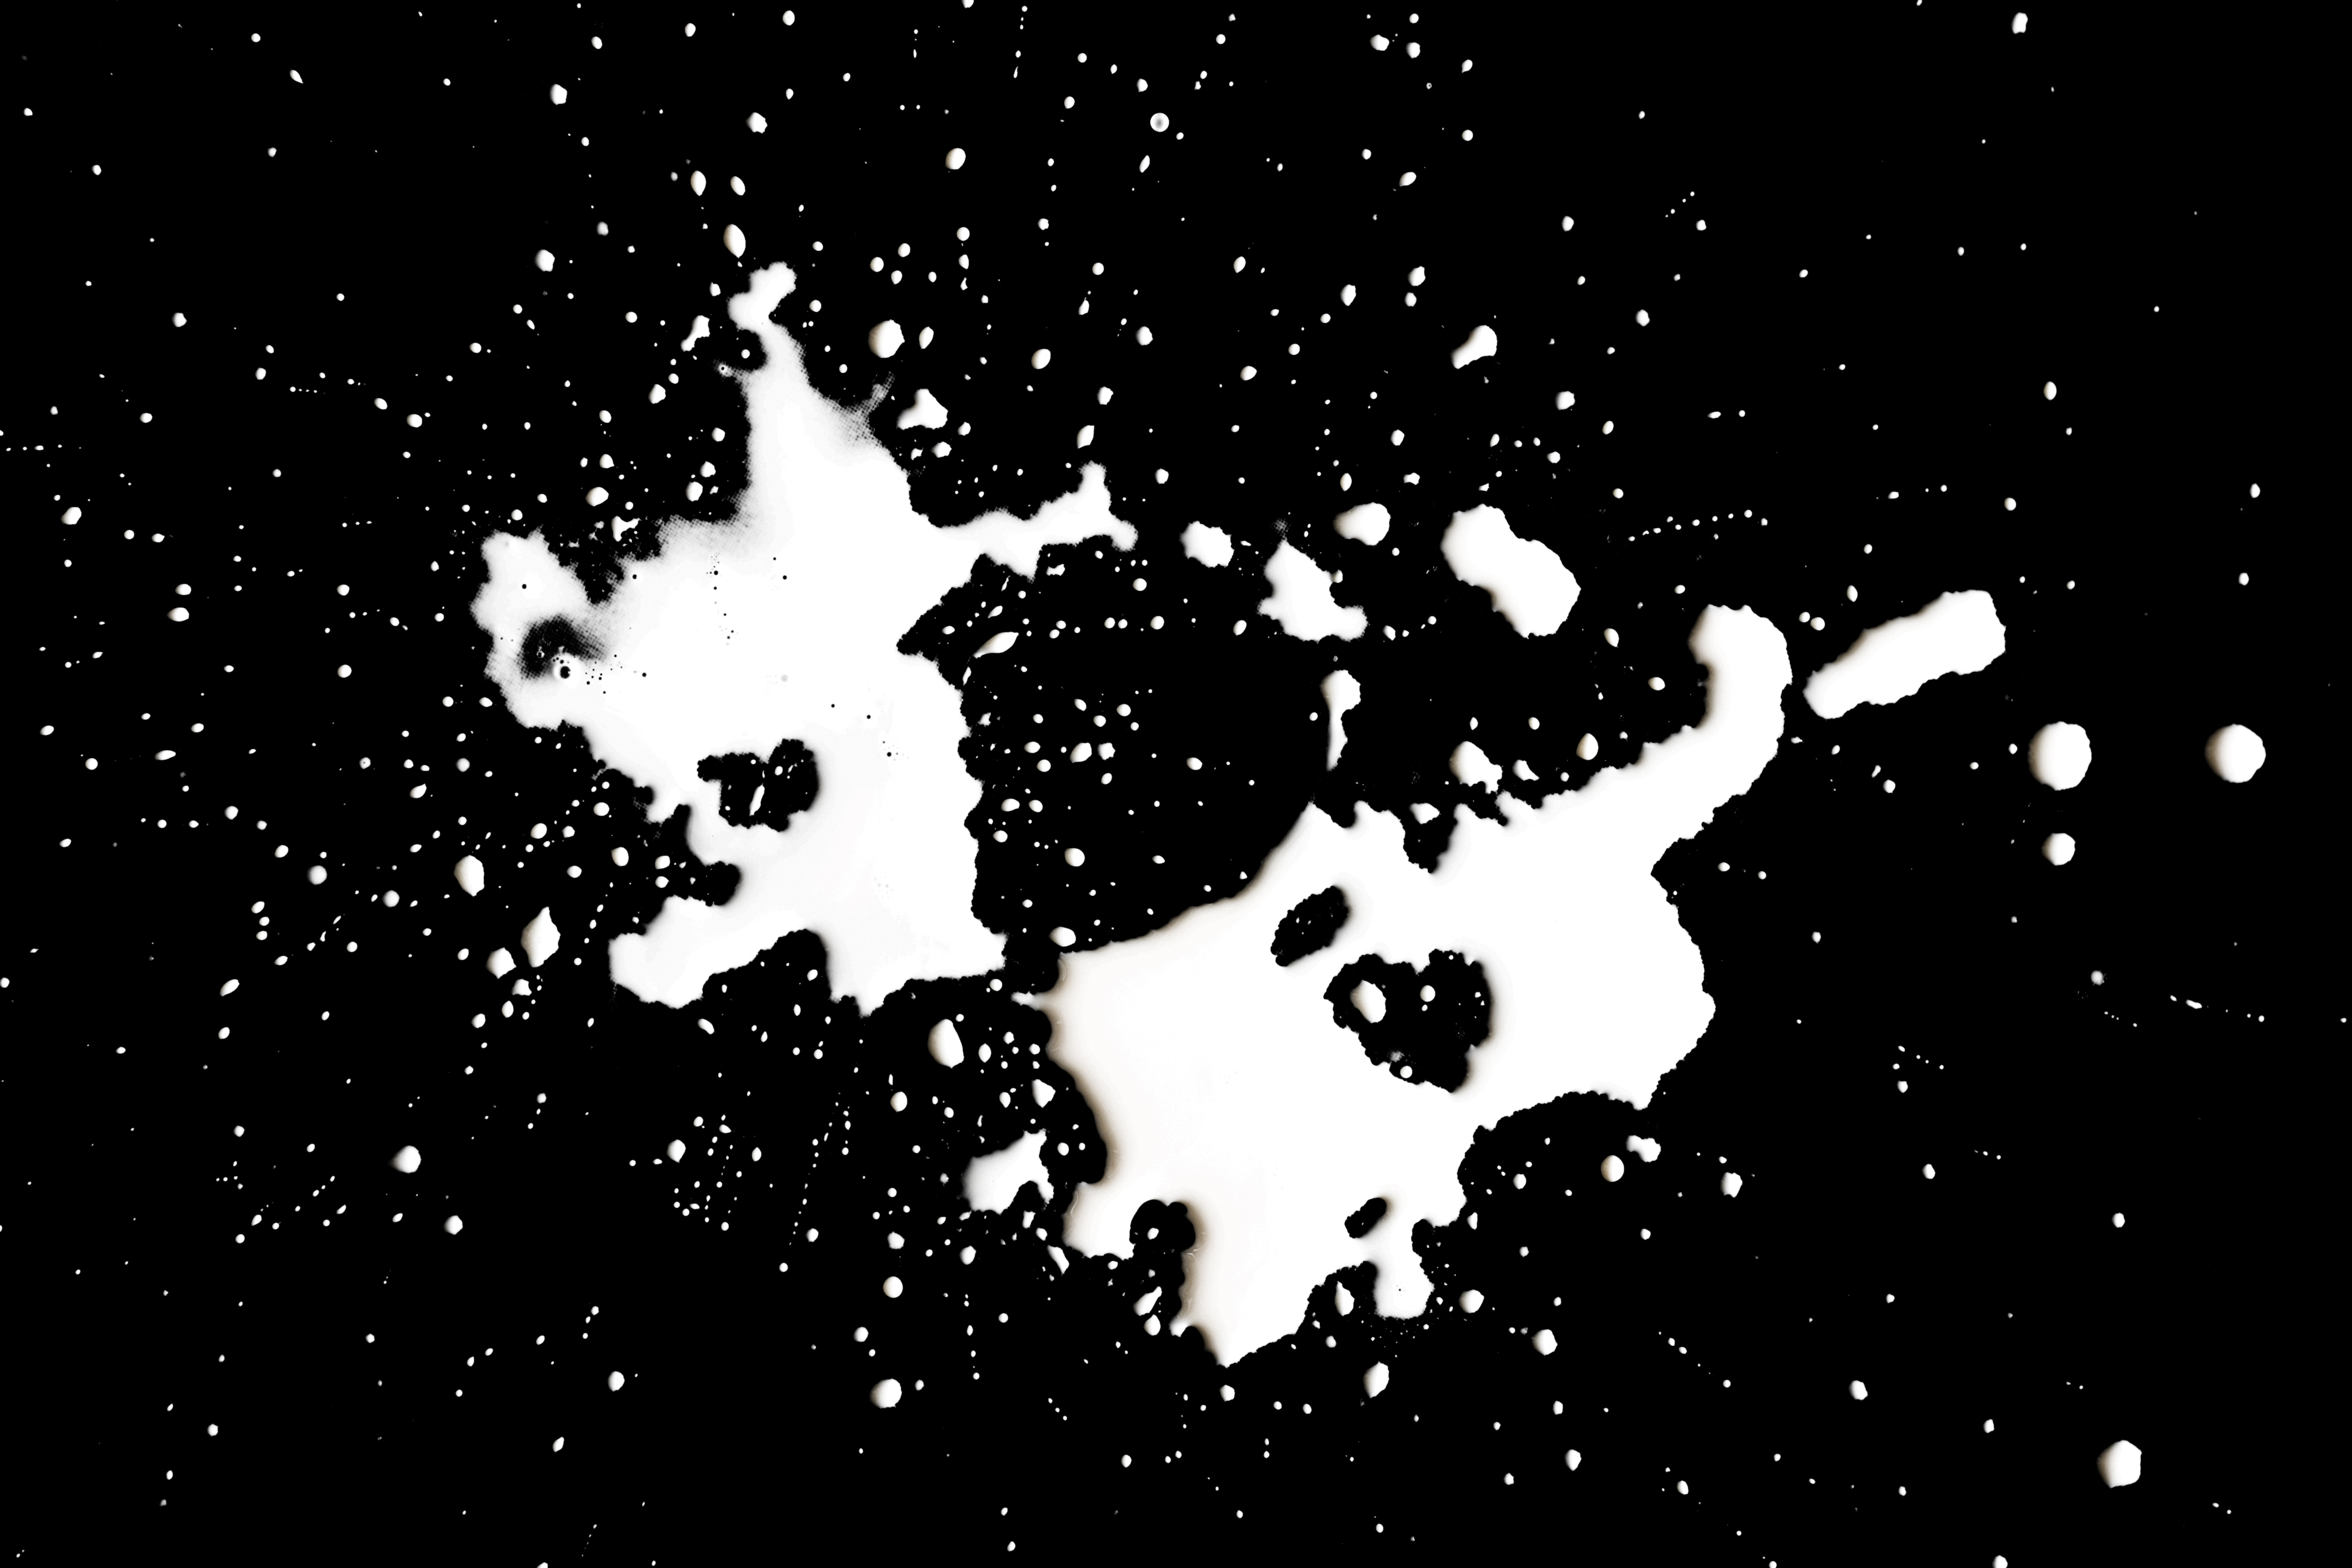 abstract, chb, spray, stains, spots, white, bw, drops, black